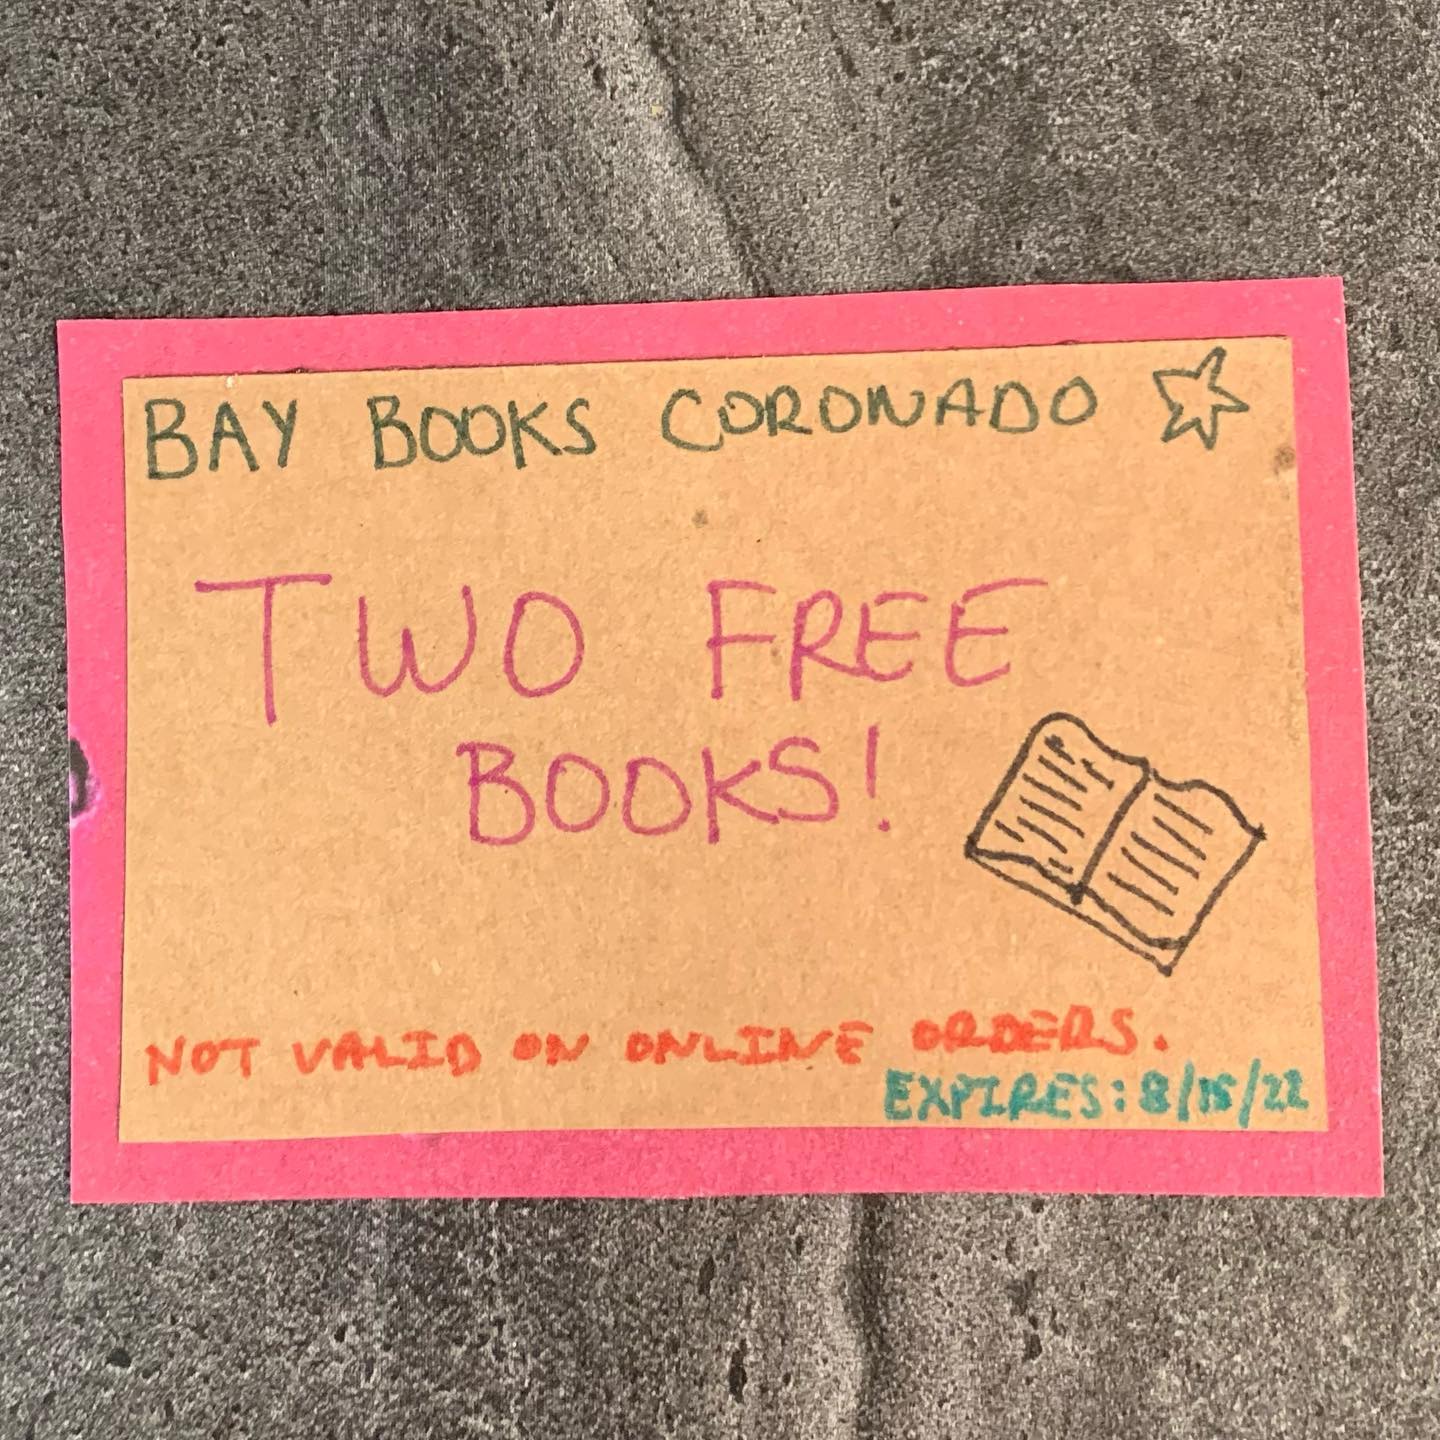 I guess we’ll HAVE to go to San Diego this summer now. 😎 This is such a thoughtful gift from my daughter. Not only … BOOKS … but it reaffirms her commitment to us taking a summer trip together. ♥️ I can’t wait to visit my hometown with my daughter and granddaughter. Taking bets on the number of books I walk out of @baybookscoronado with. Hint: It will be more than two.